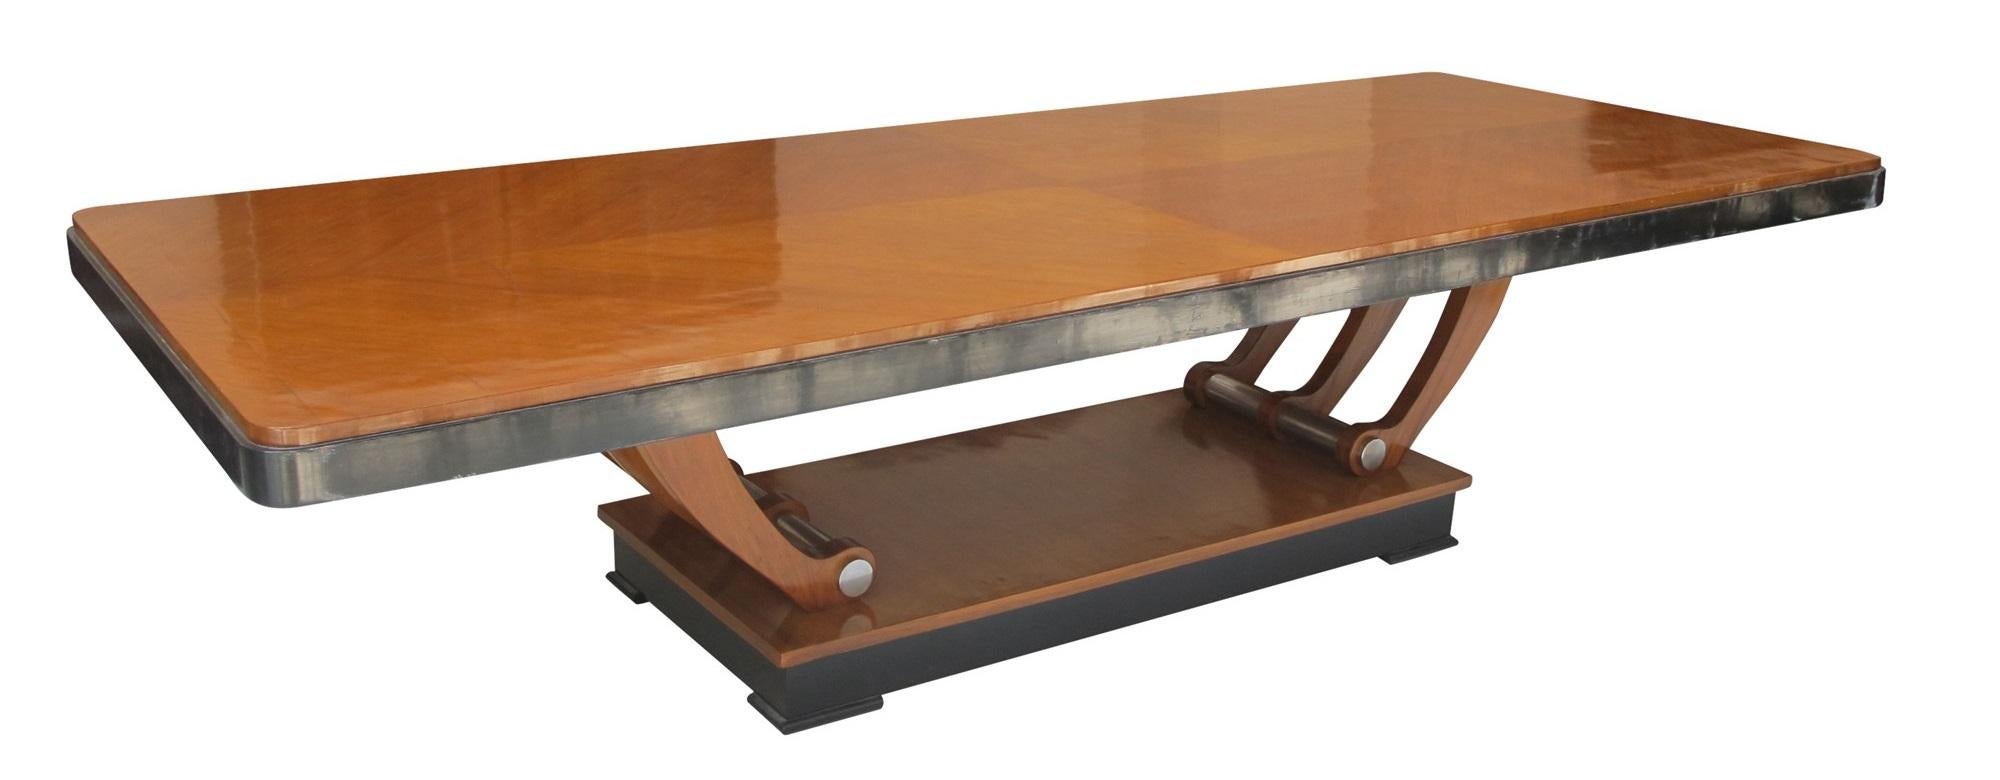 Dining table Art Deco

It is delivered re-polished
Year: 1920
Country: French
Wood 
Finish: polyurethanic lacquer
It is an elegant and sophisticated dining table.
You want to live in the golden years, this is the dining table that your project